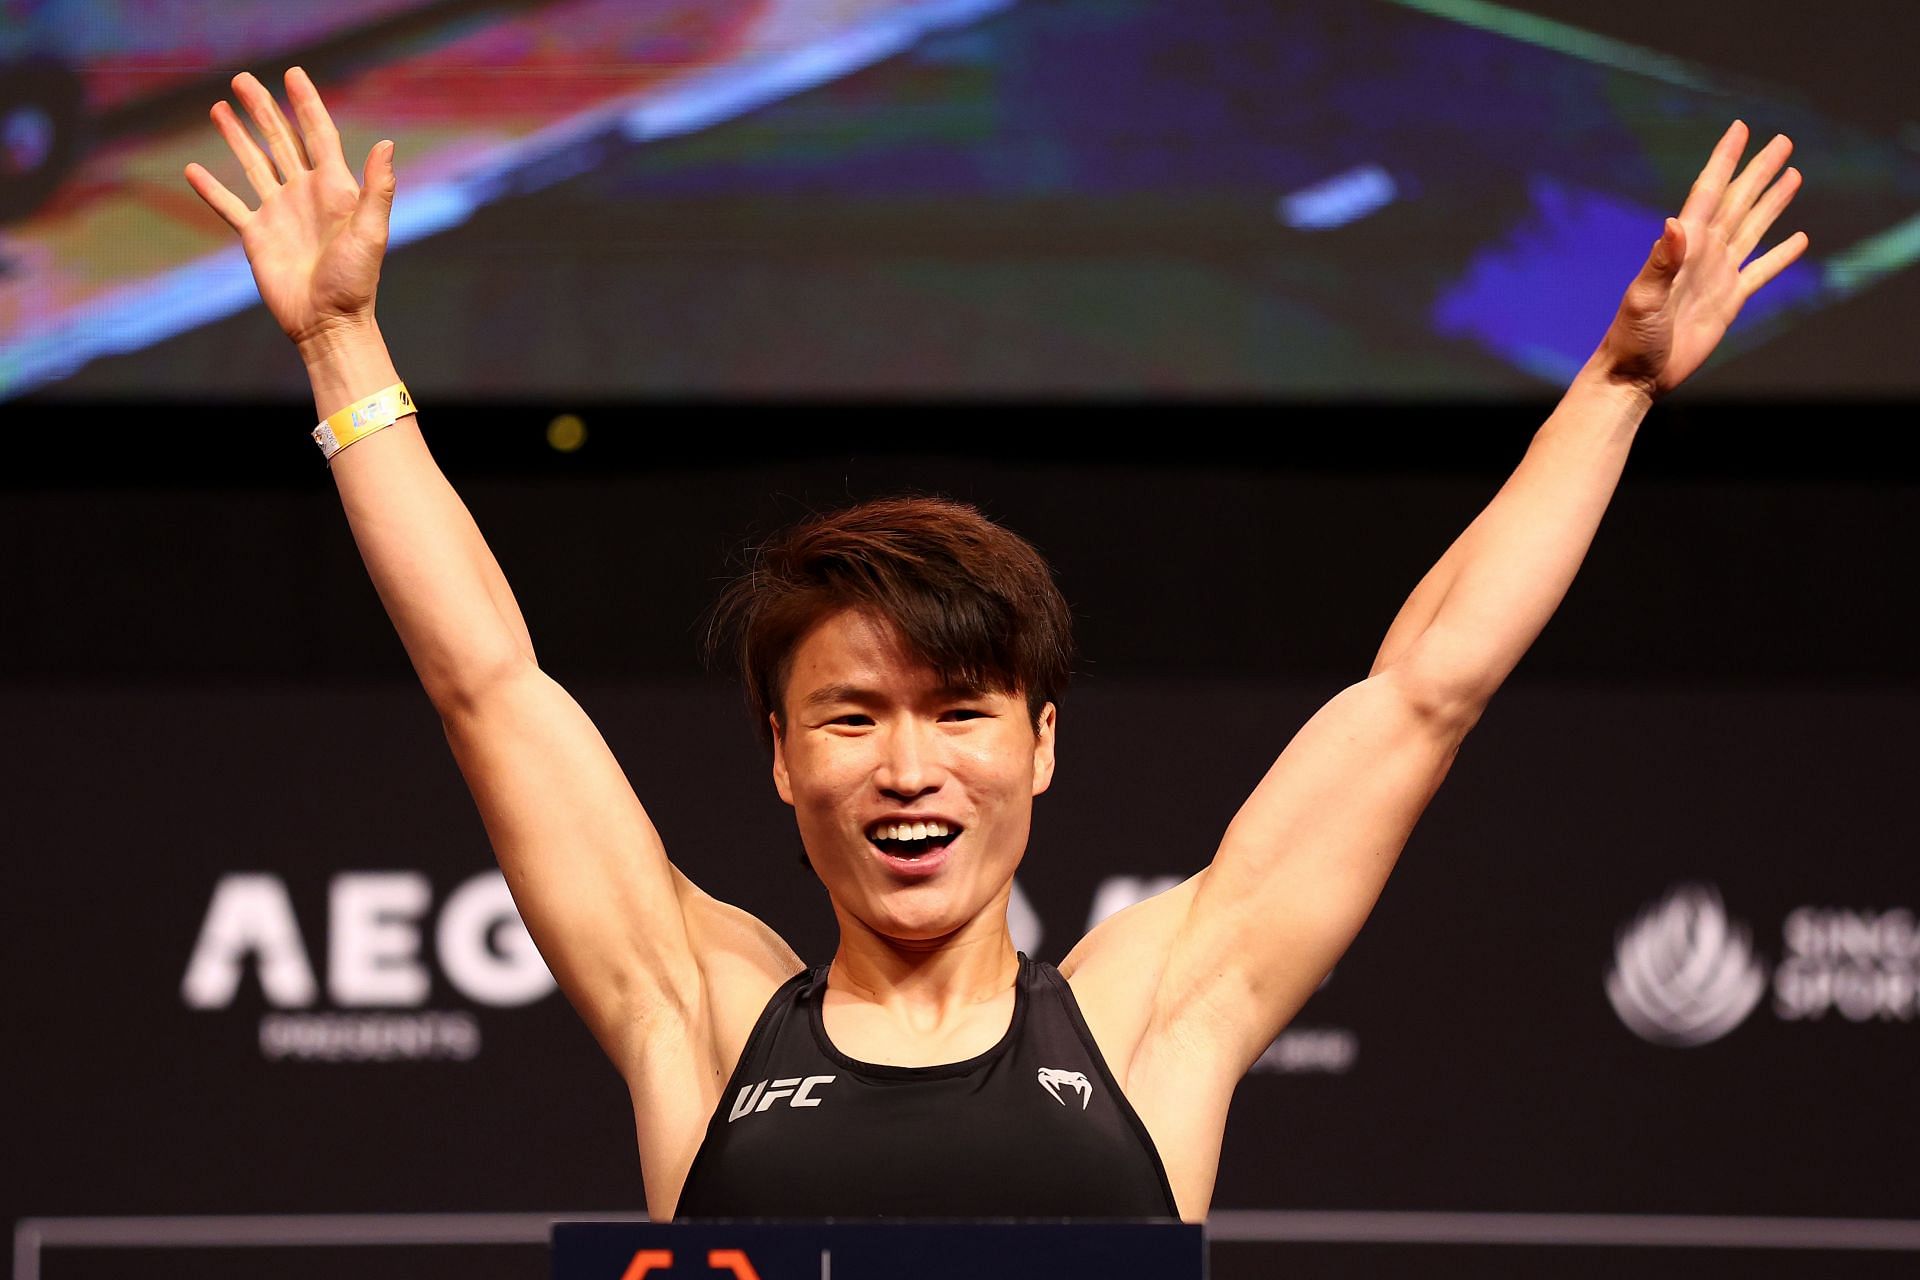 Zhang is currently the no. 2 ranked fighter at strawweight